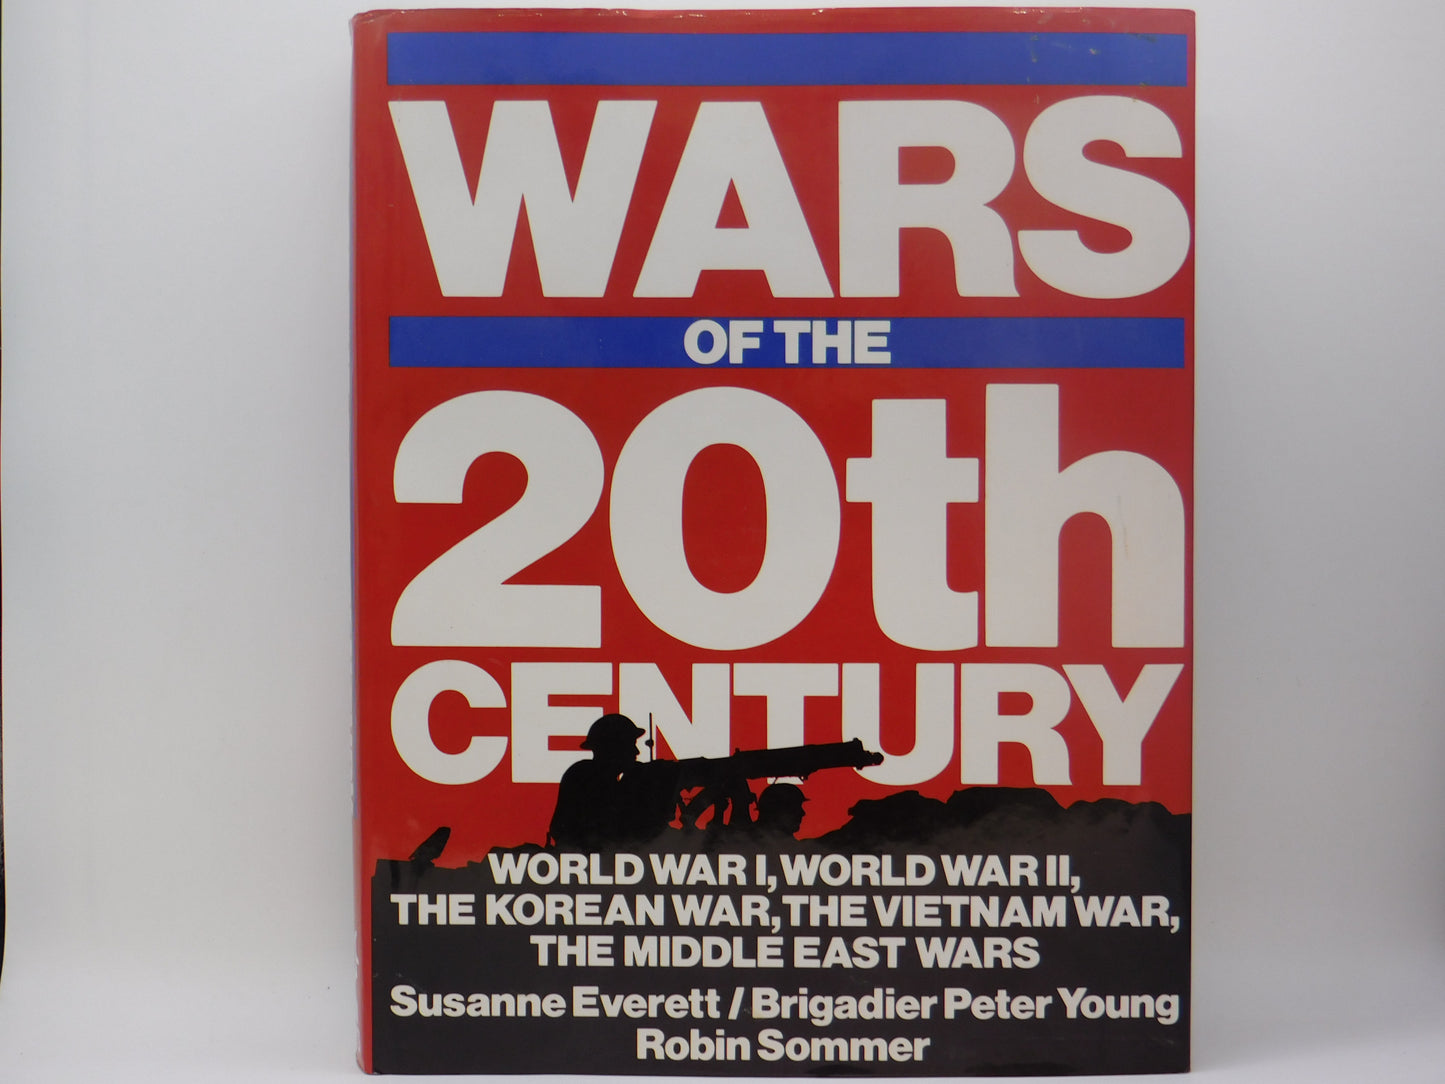 Wars Of The 20th Century By Susanne Everett, Brigadier Peter Young And Robin Sommer